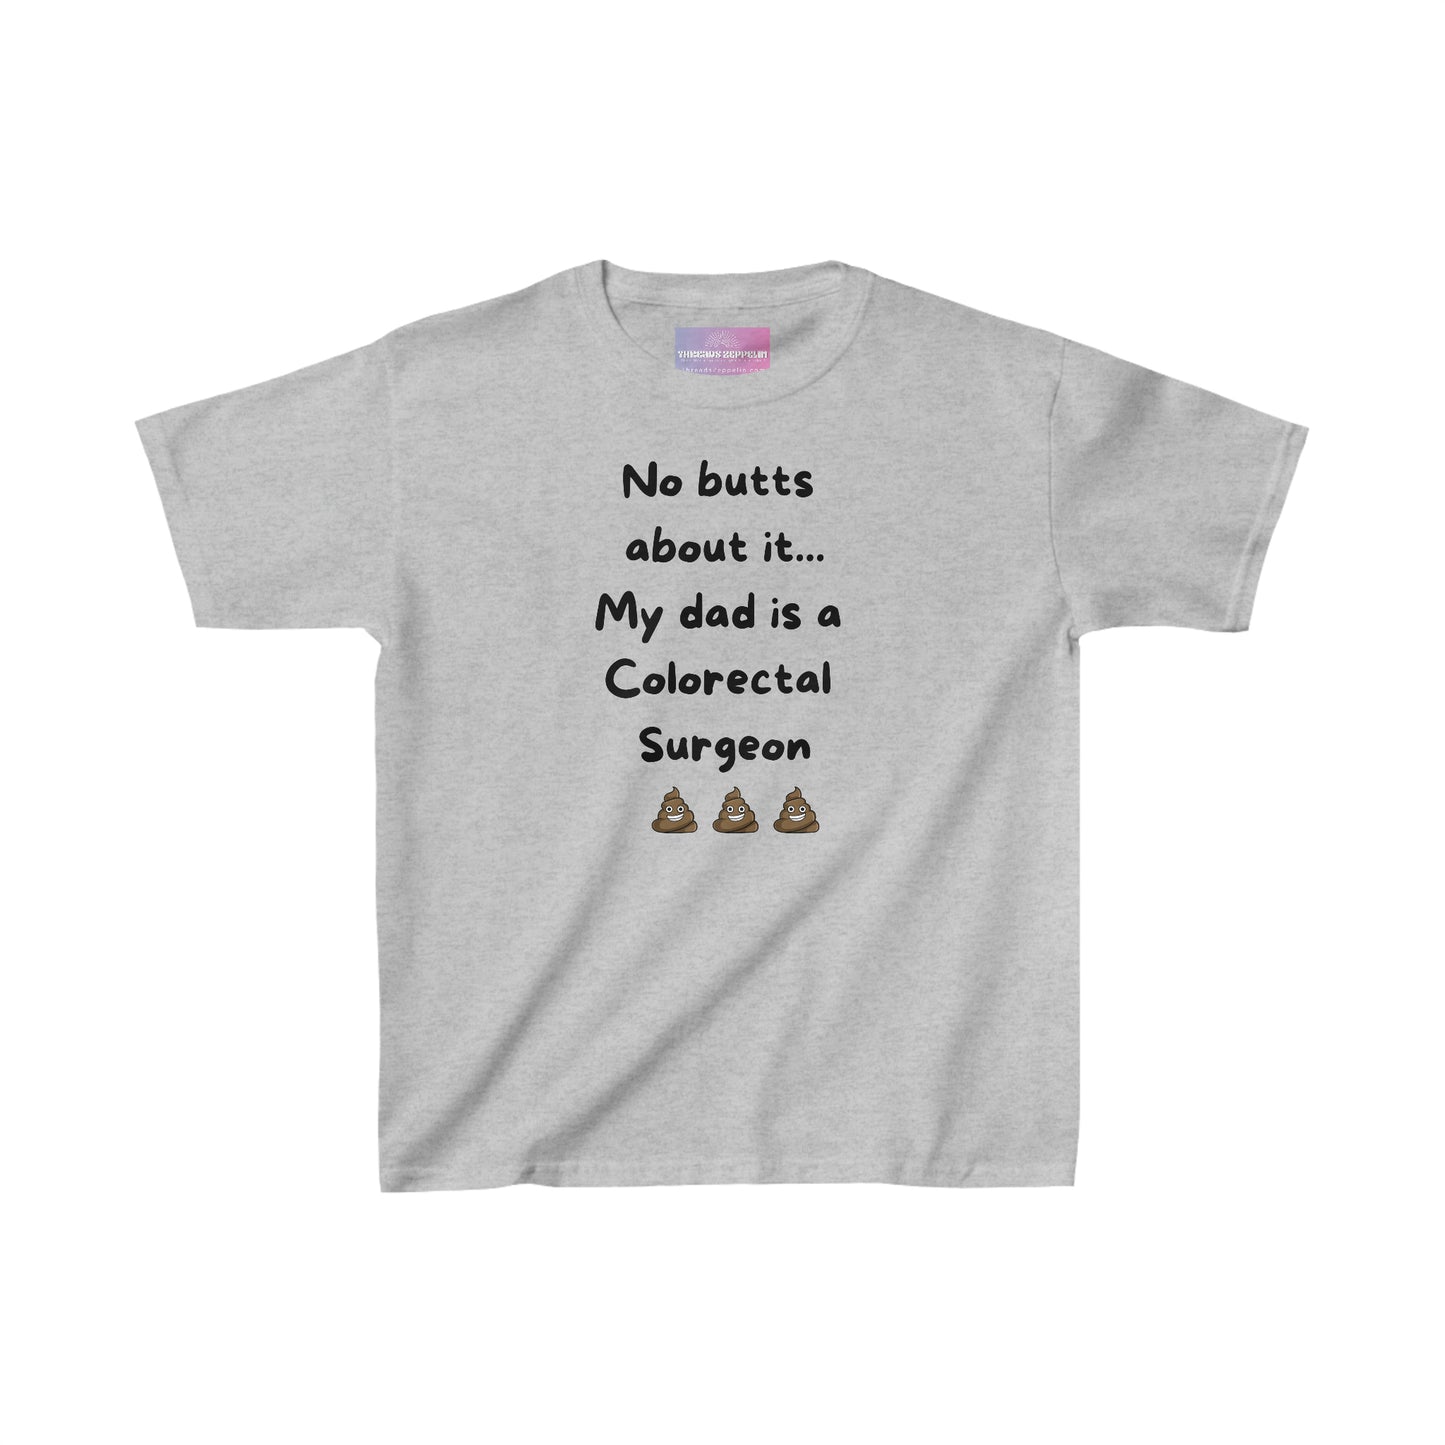 No Butts About it, My Dad is a Colorectal Surgeon, Kids Heavy Cotton Tee